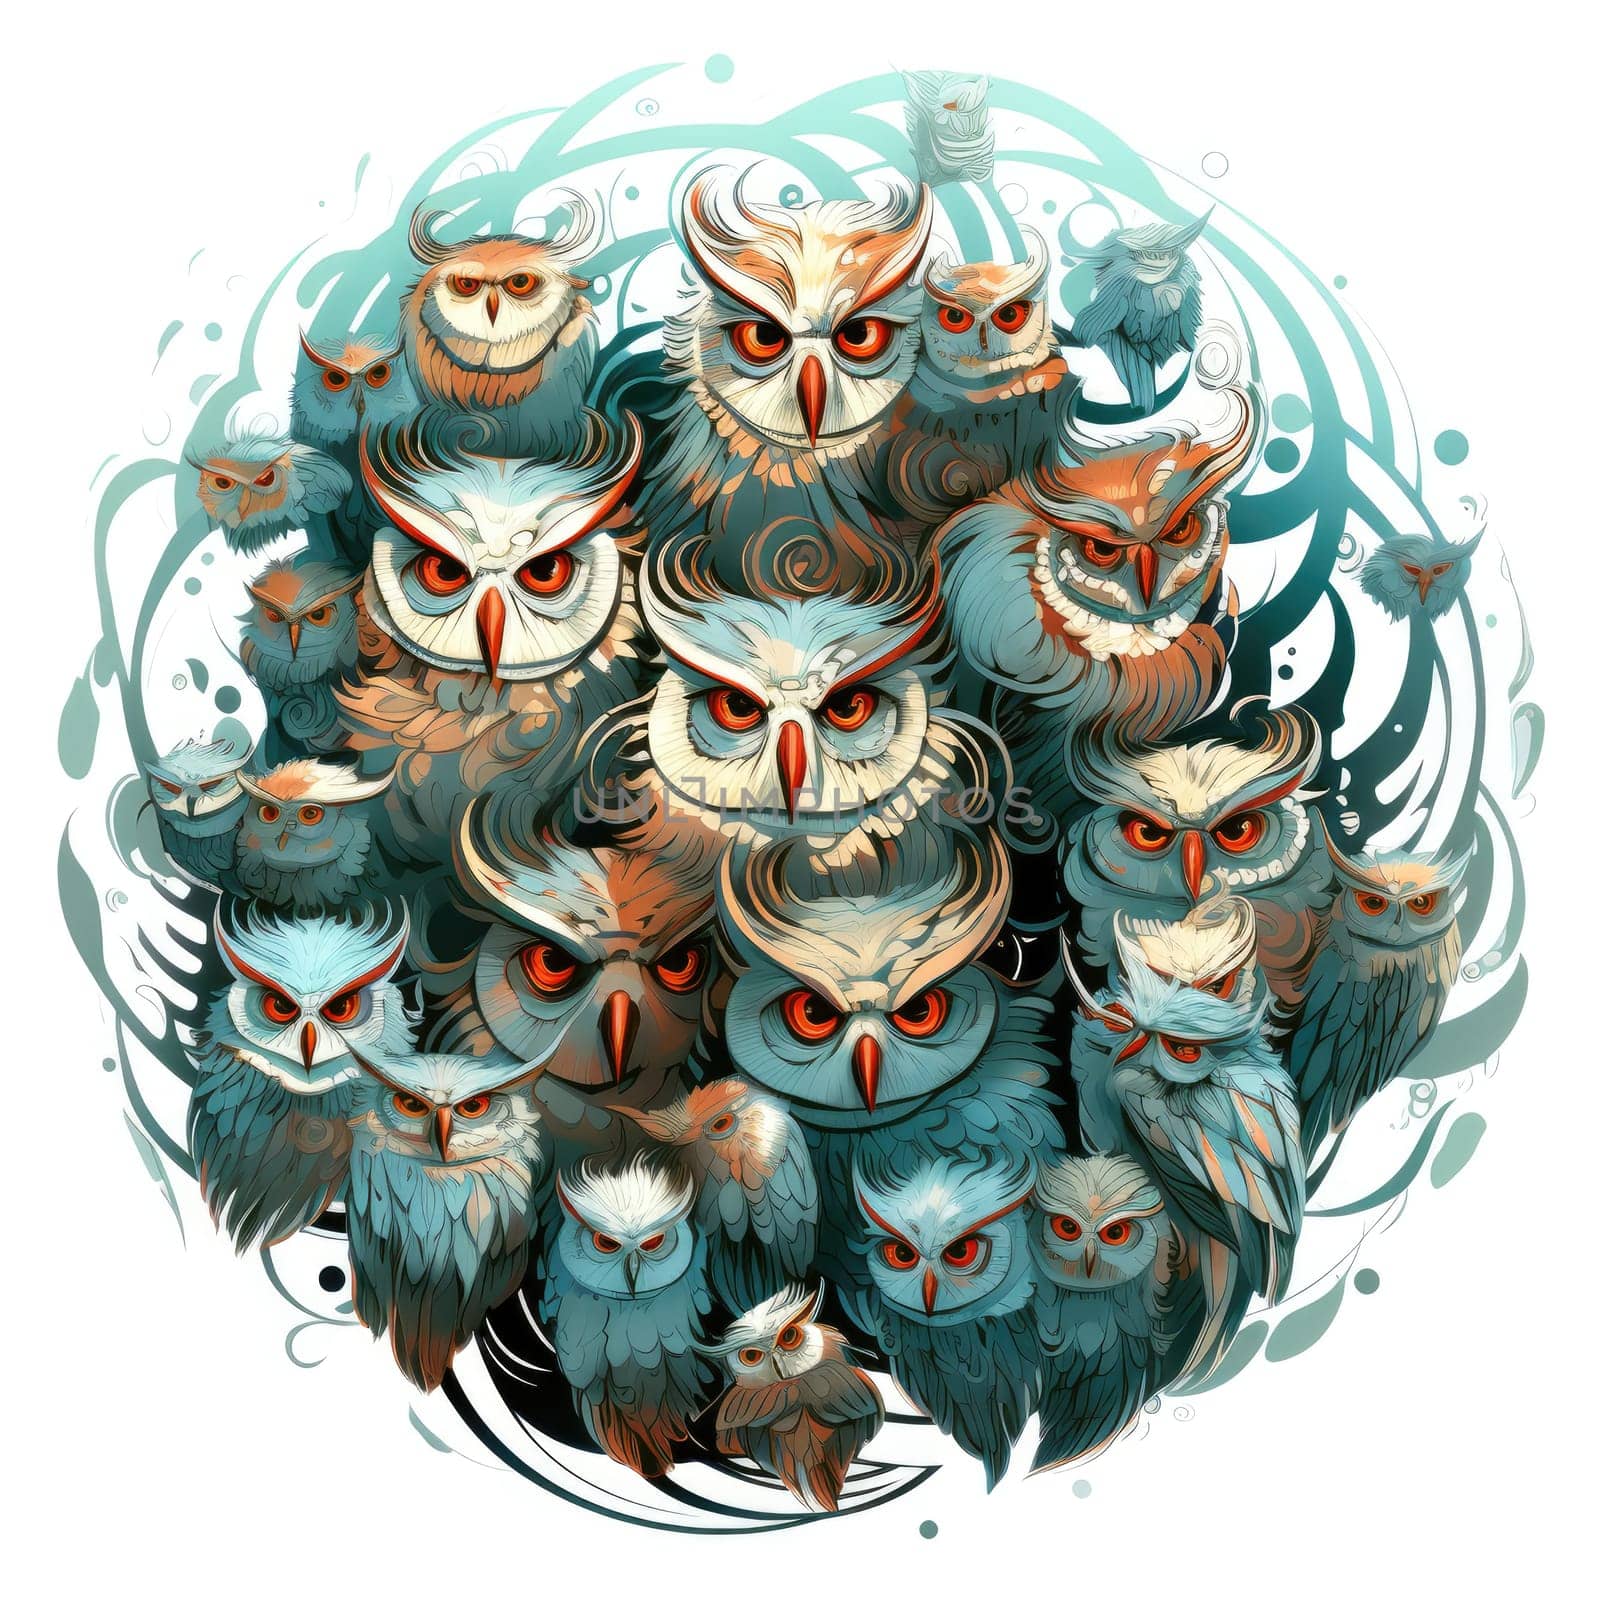 Illustration of an owl family in a decorative art style. by palinchak